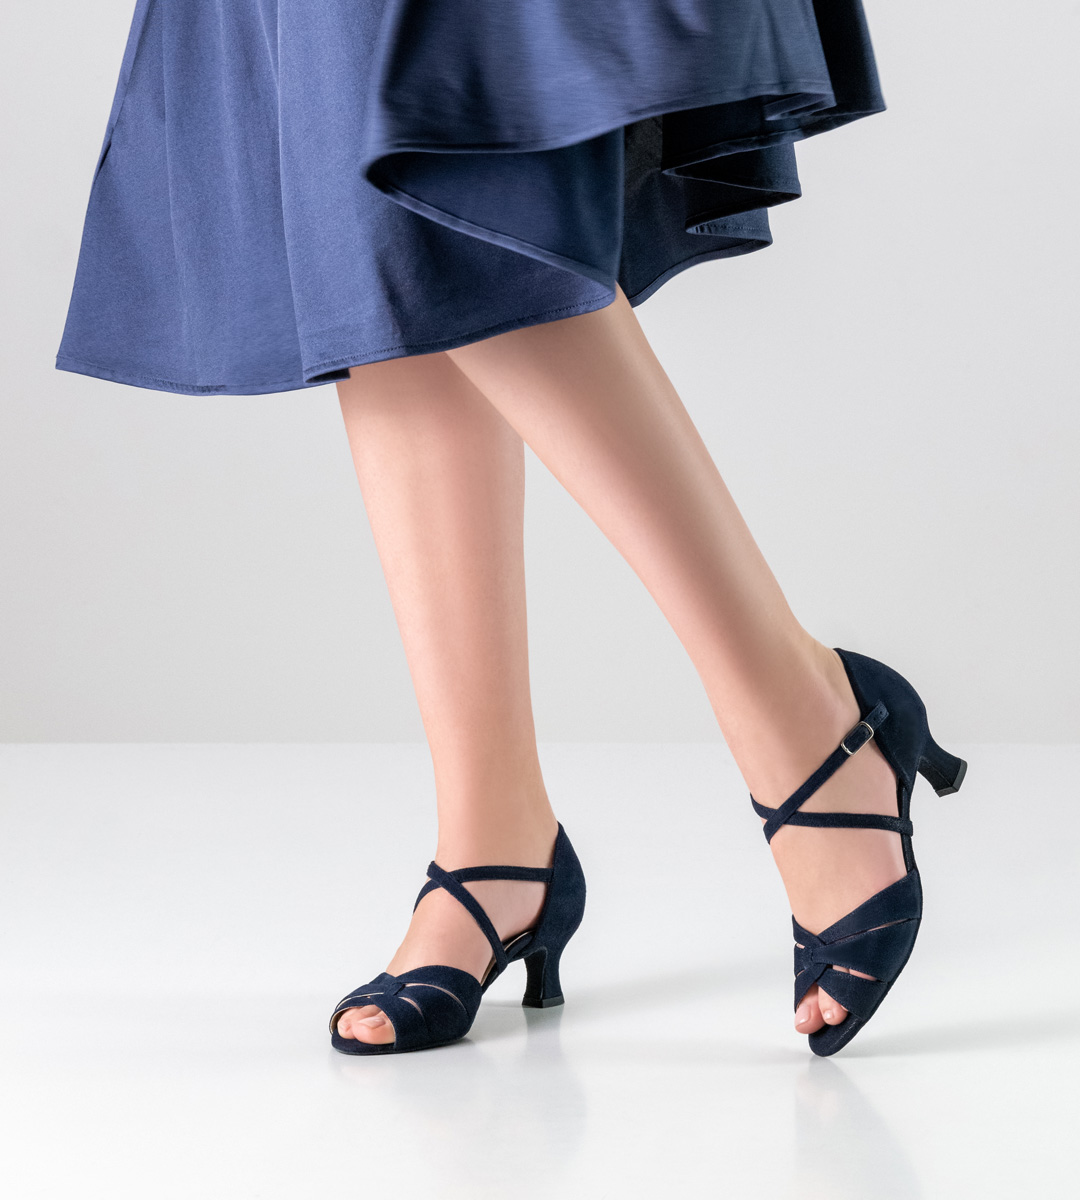 Blue skirt in combination with open Werner Kern ladies dance shoe in blue